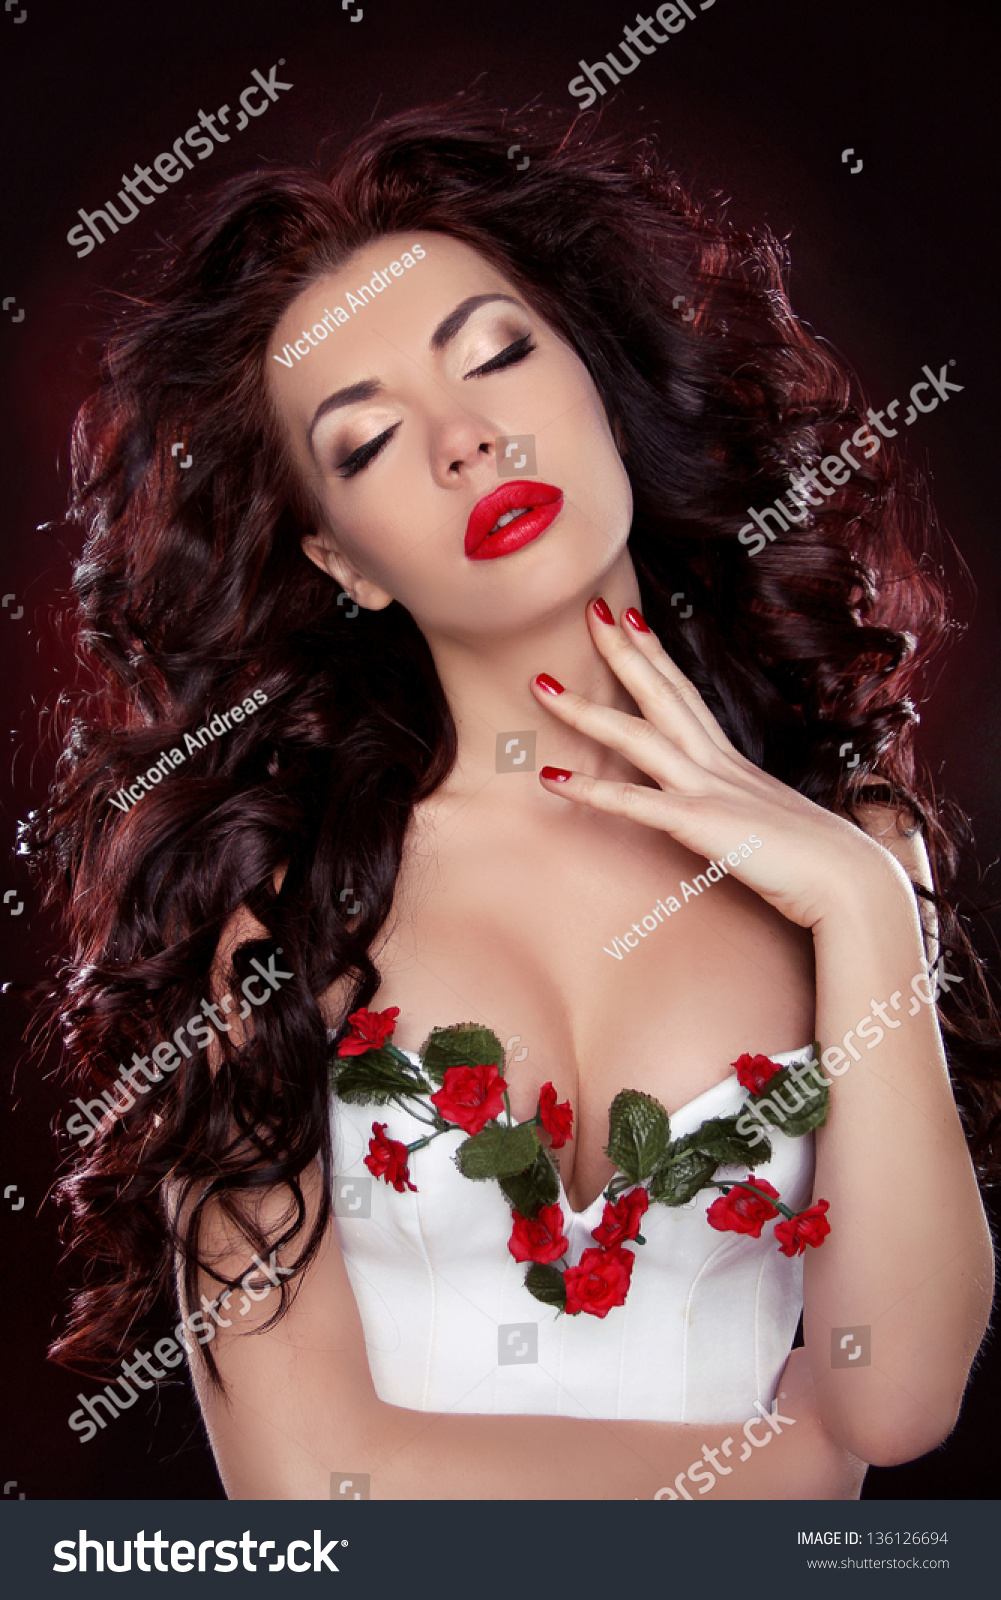 Hot Red Lips Portrait Of Sexy Brunette Girl With Professional Make Up